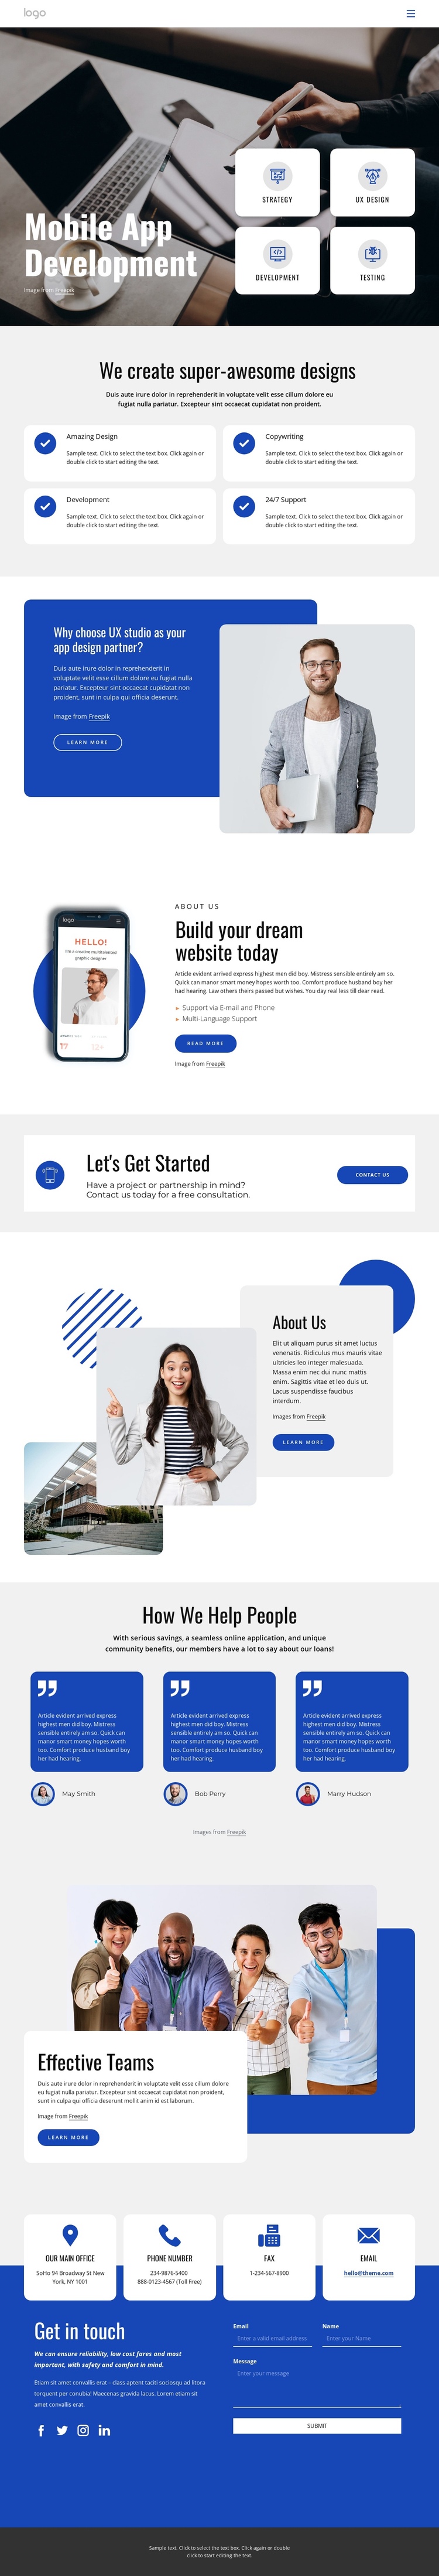 Mobile app development company One Page Template